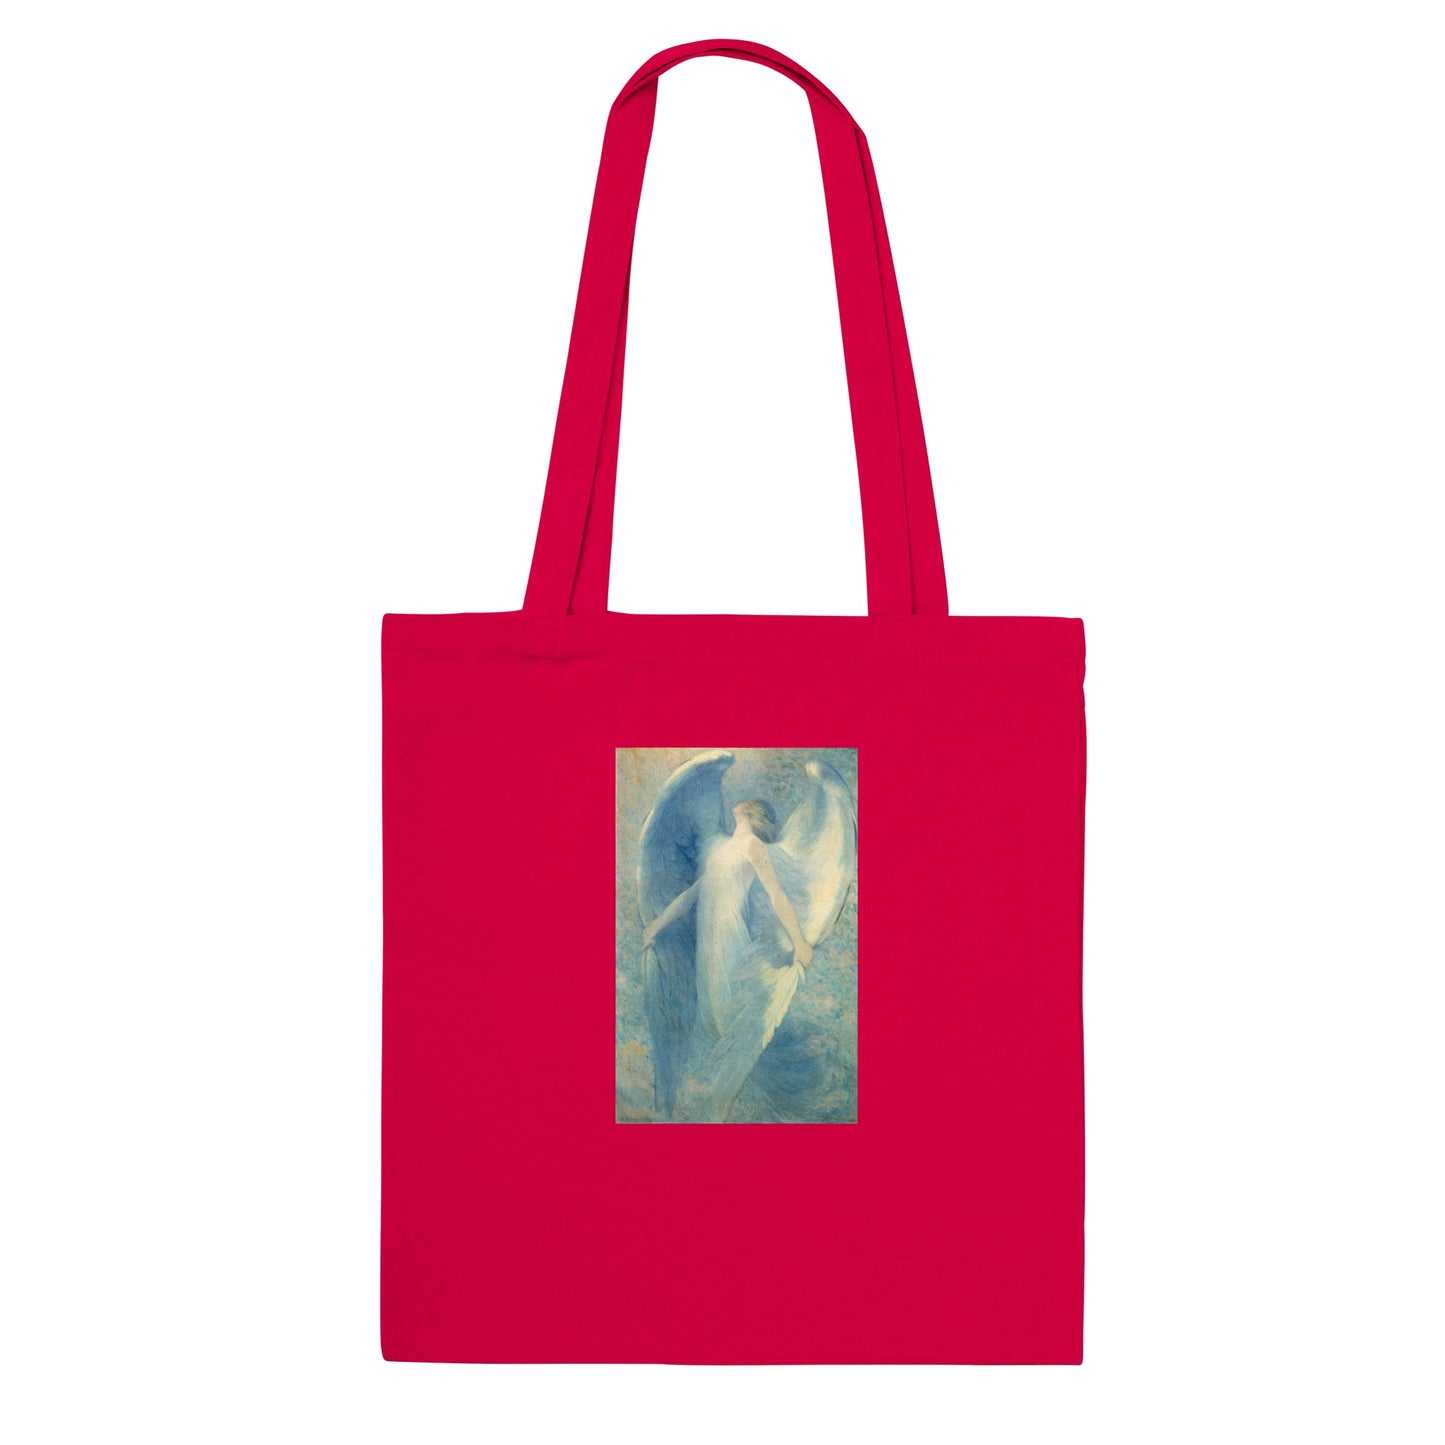 WILLIAM BAXTER CLOSSON - THE ANGEL - CLASSIC TOTE BAG 